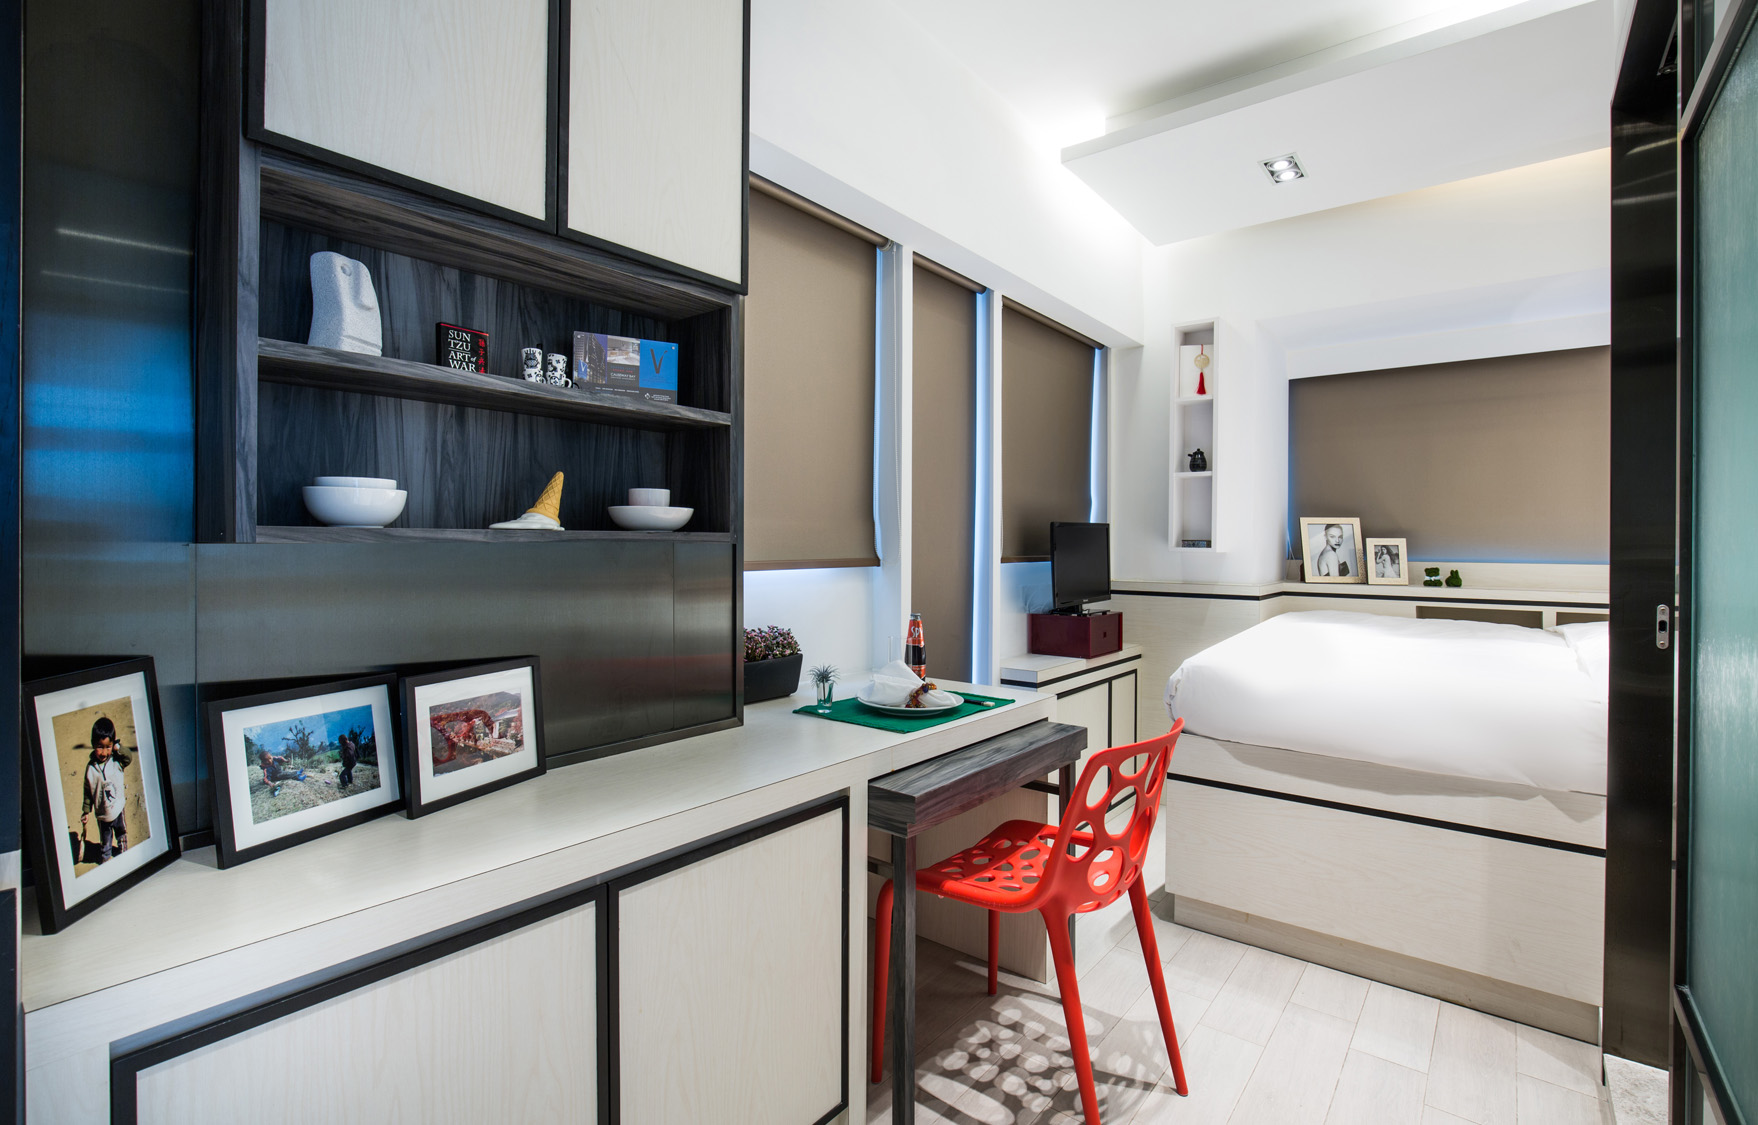 Studio with plenty of storage space at The Lodge serviced apartment in West Kowloon